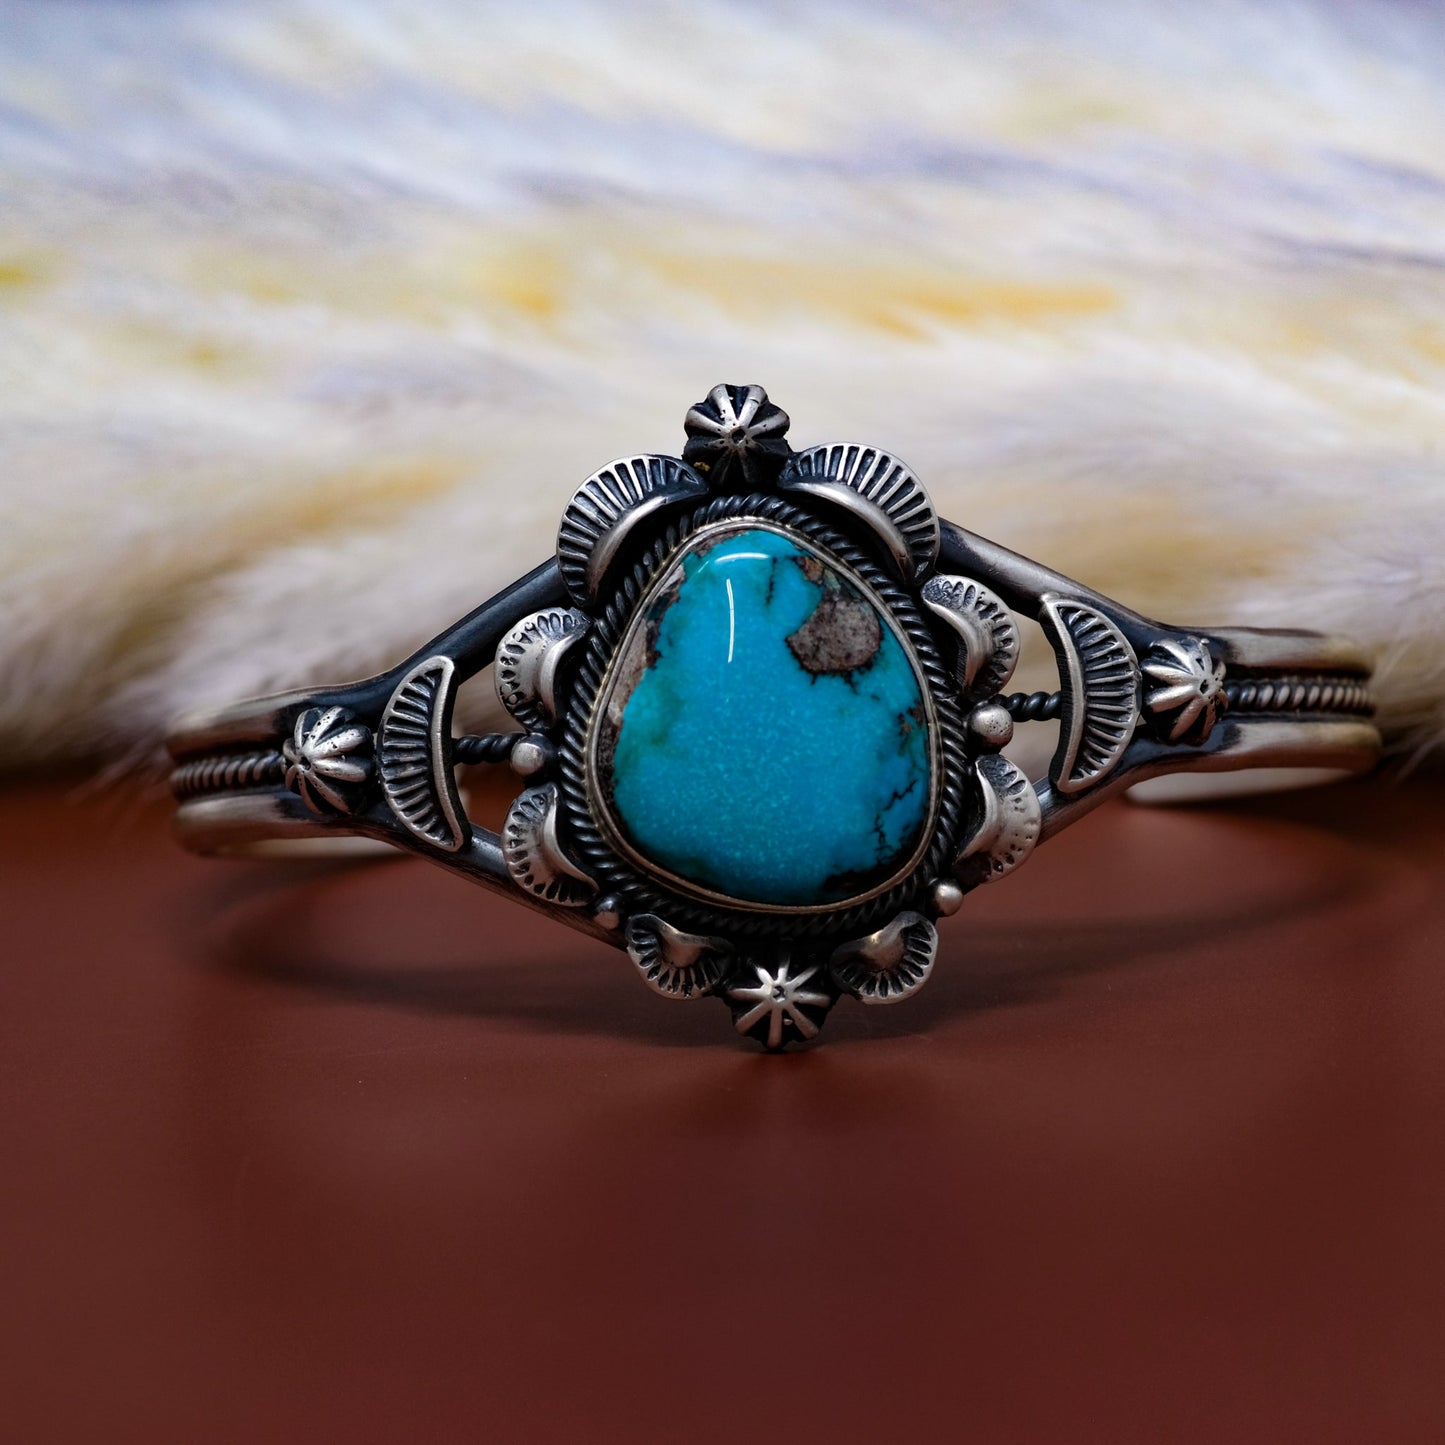 Bisbee Turquoise & Sterling Silver Cuff by Randy Boyd